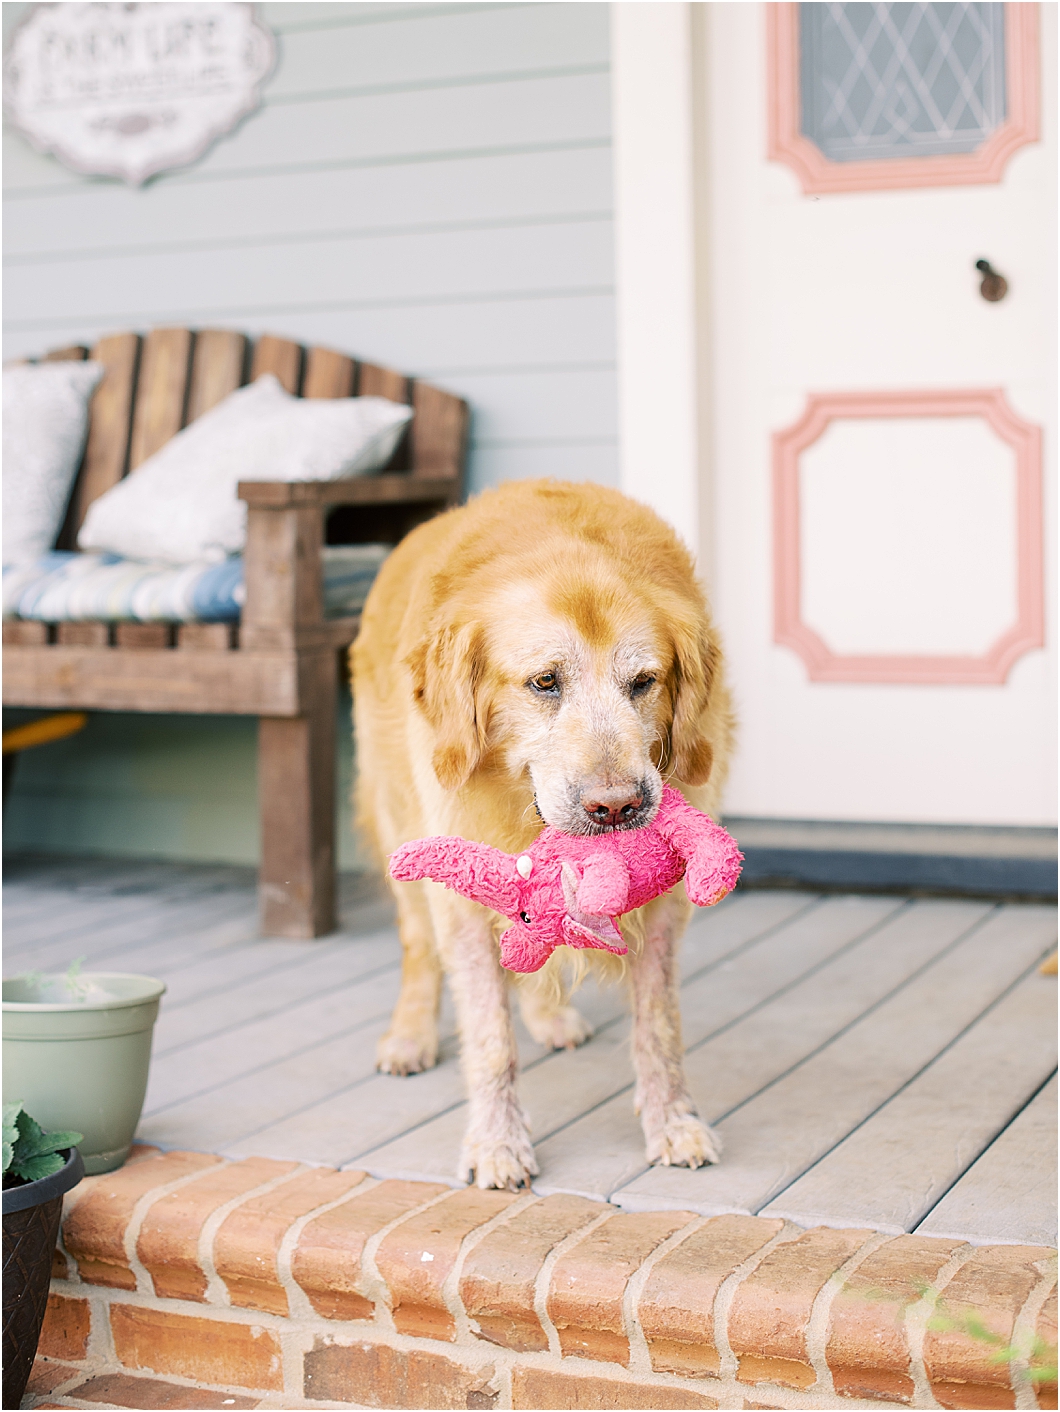 At Home Anniversary Photos with Dogs by Hillary Muelleck